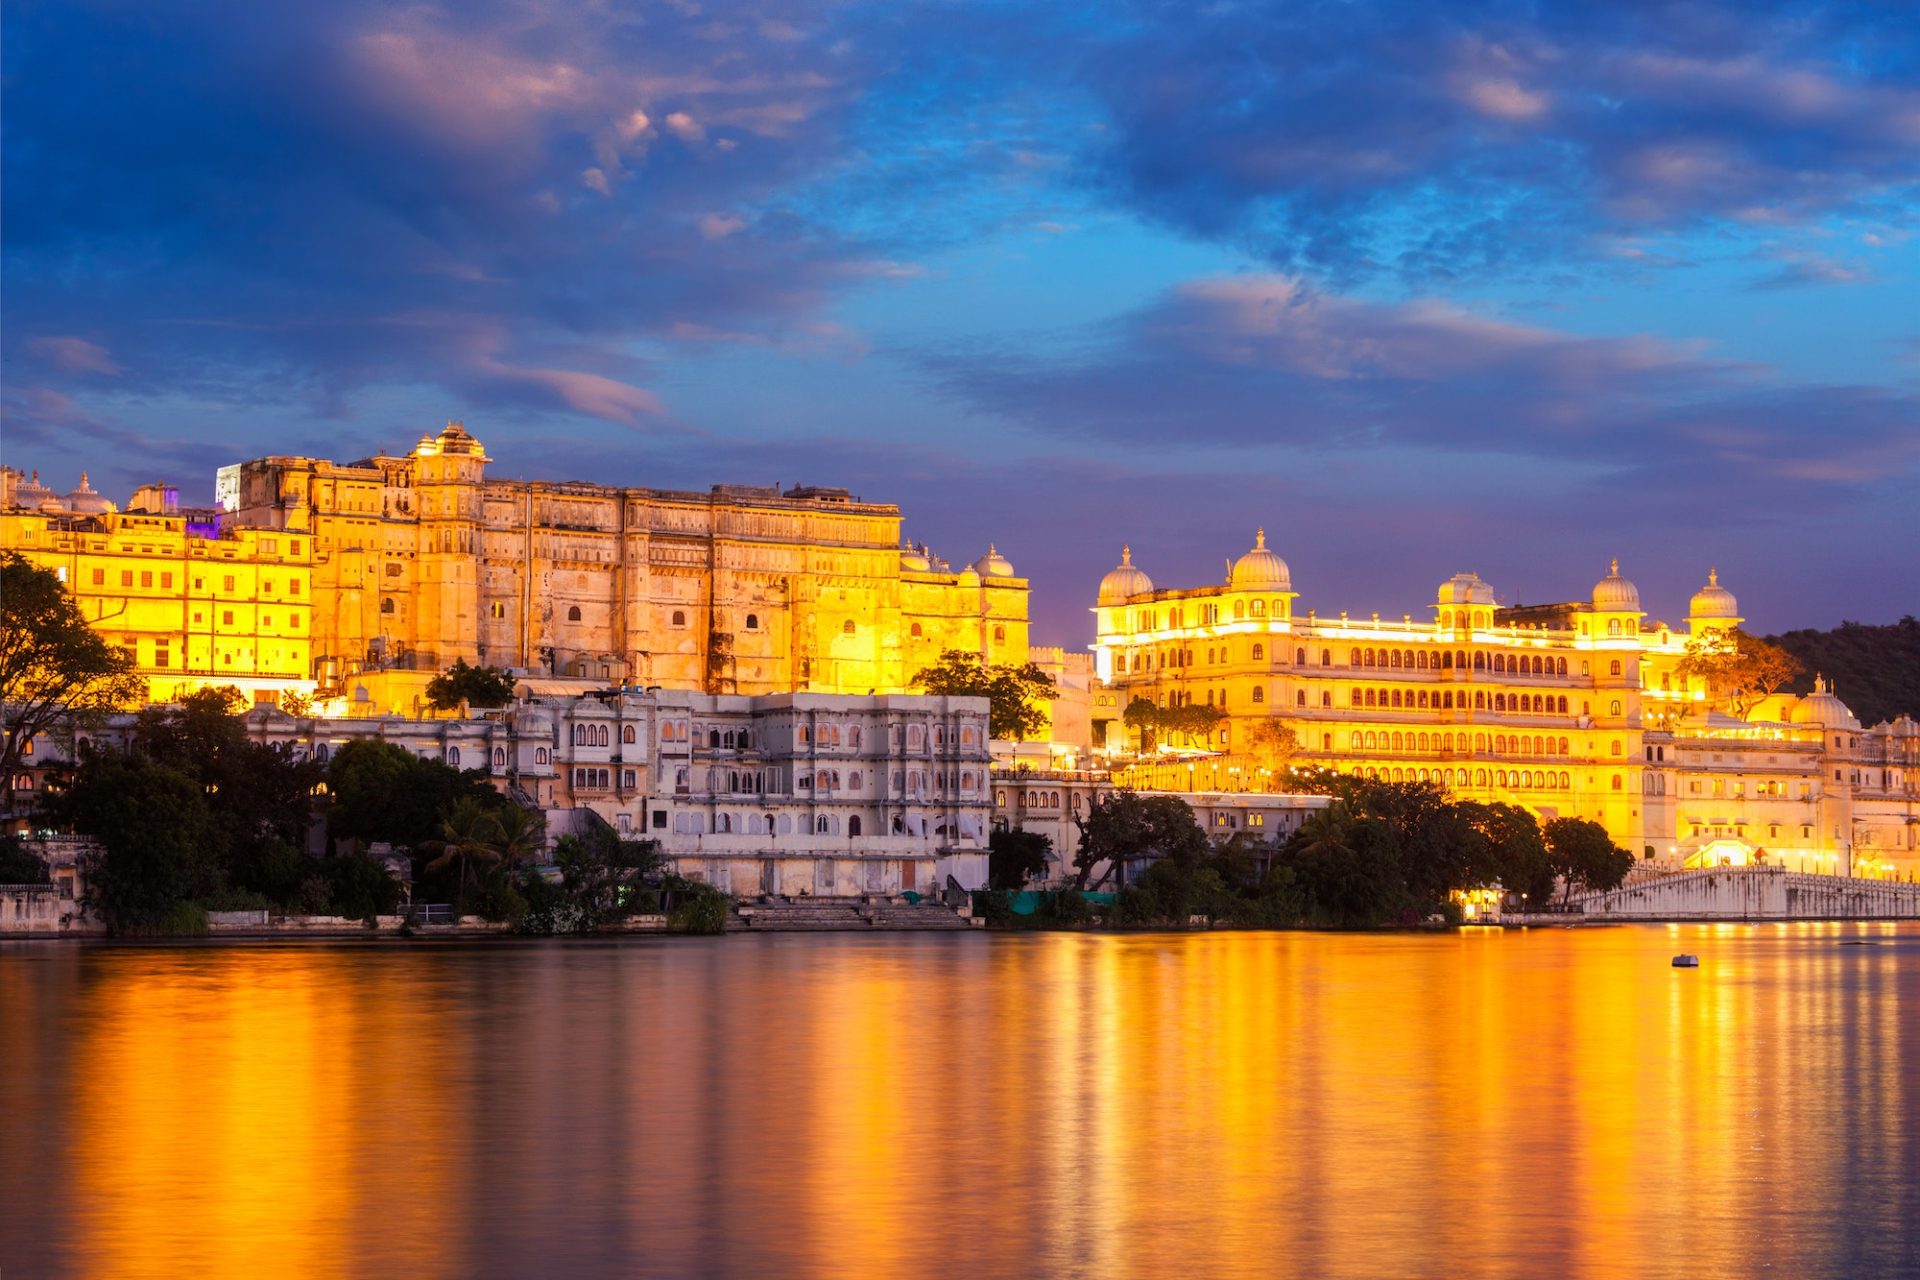 Udaipur City Palace in the evening view. Udaipur, India